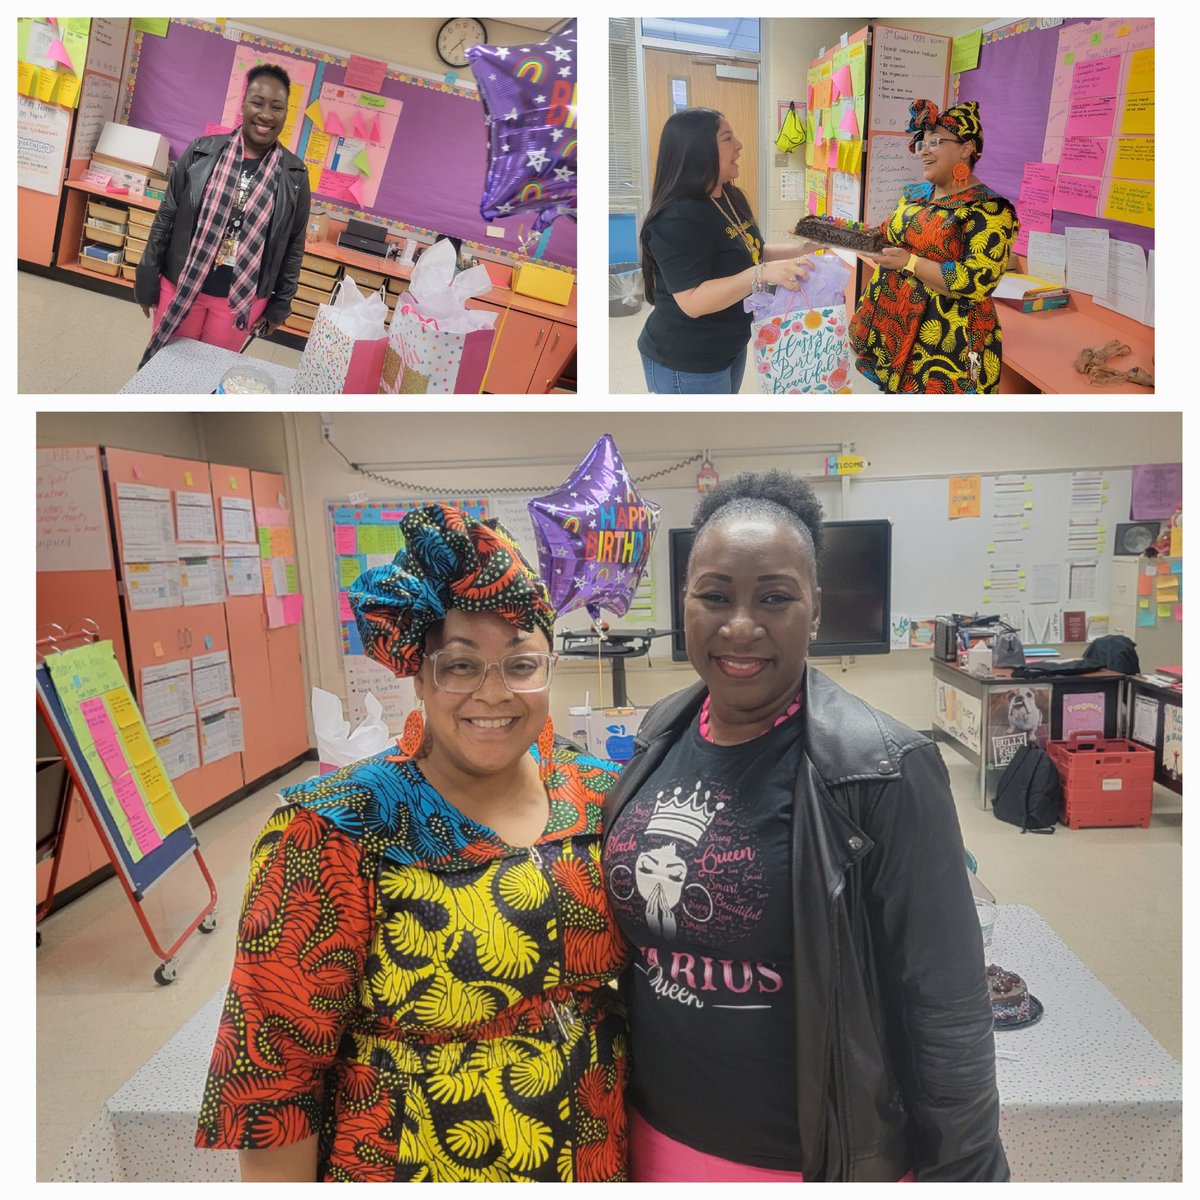 Today, we celebrated @A_Hart73 and @JEANNICOLE06 ... Happy Birthday Ms. Hart and Ms. Woods! @barnesriley6 @Mrs_C_Moreno @kelli_bernal